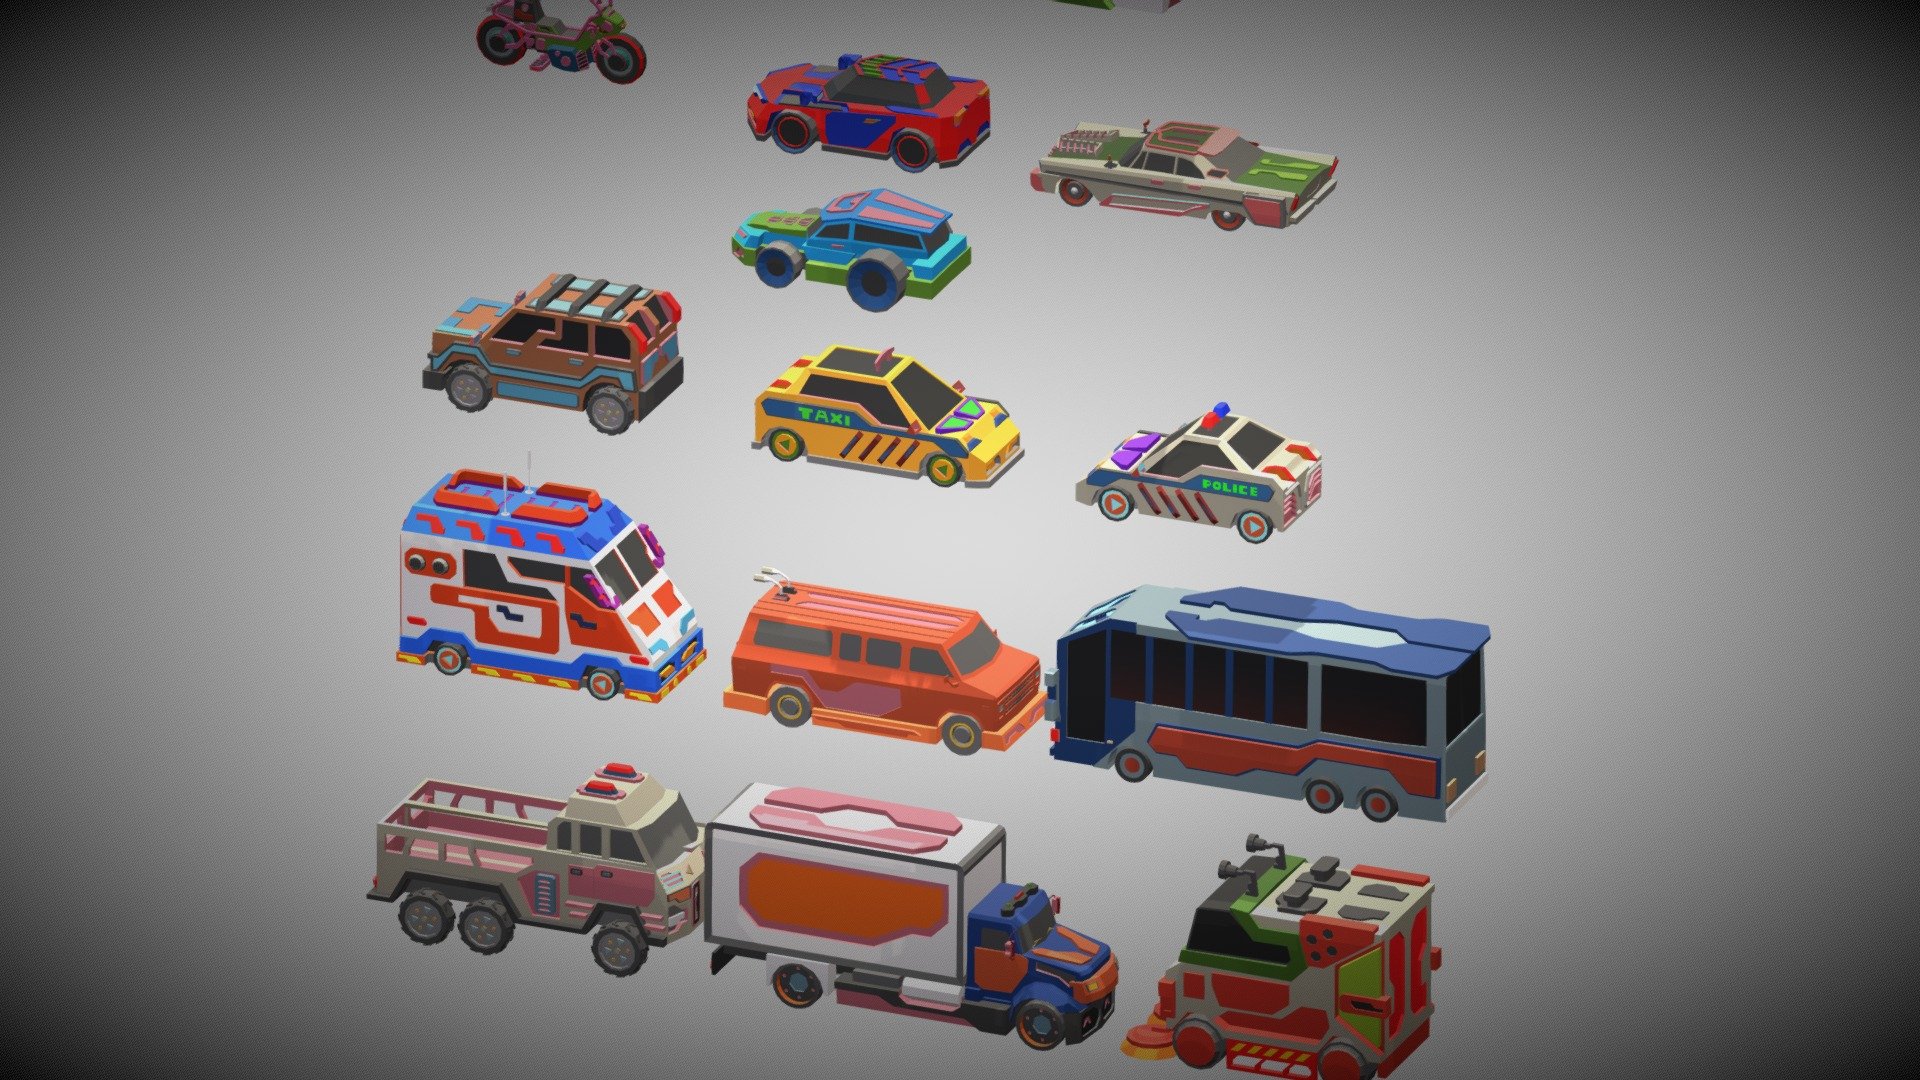 16 low poly scifi vehicles
1meterial texture 
creat in blender 3 - Scifi vehicles pack - Buy Royalty Free 3D model by CGmano (@Mohamed.Moh.Mabkhouti) 3d model